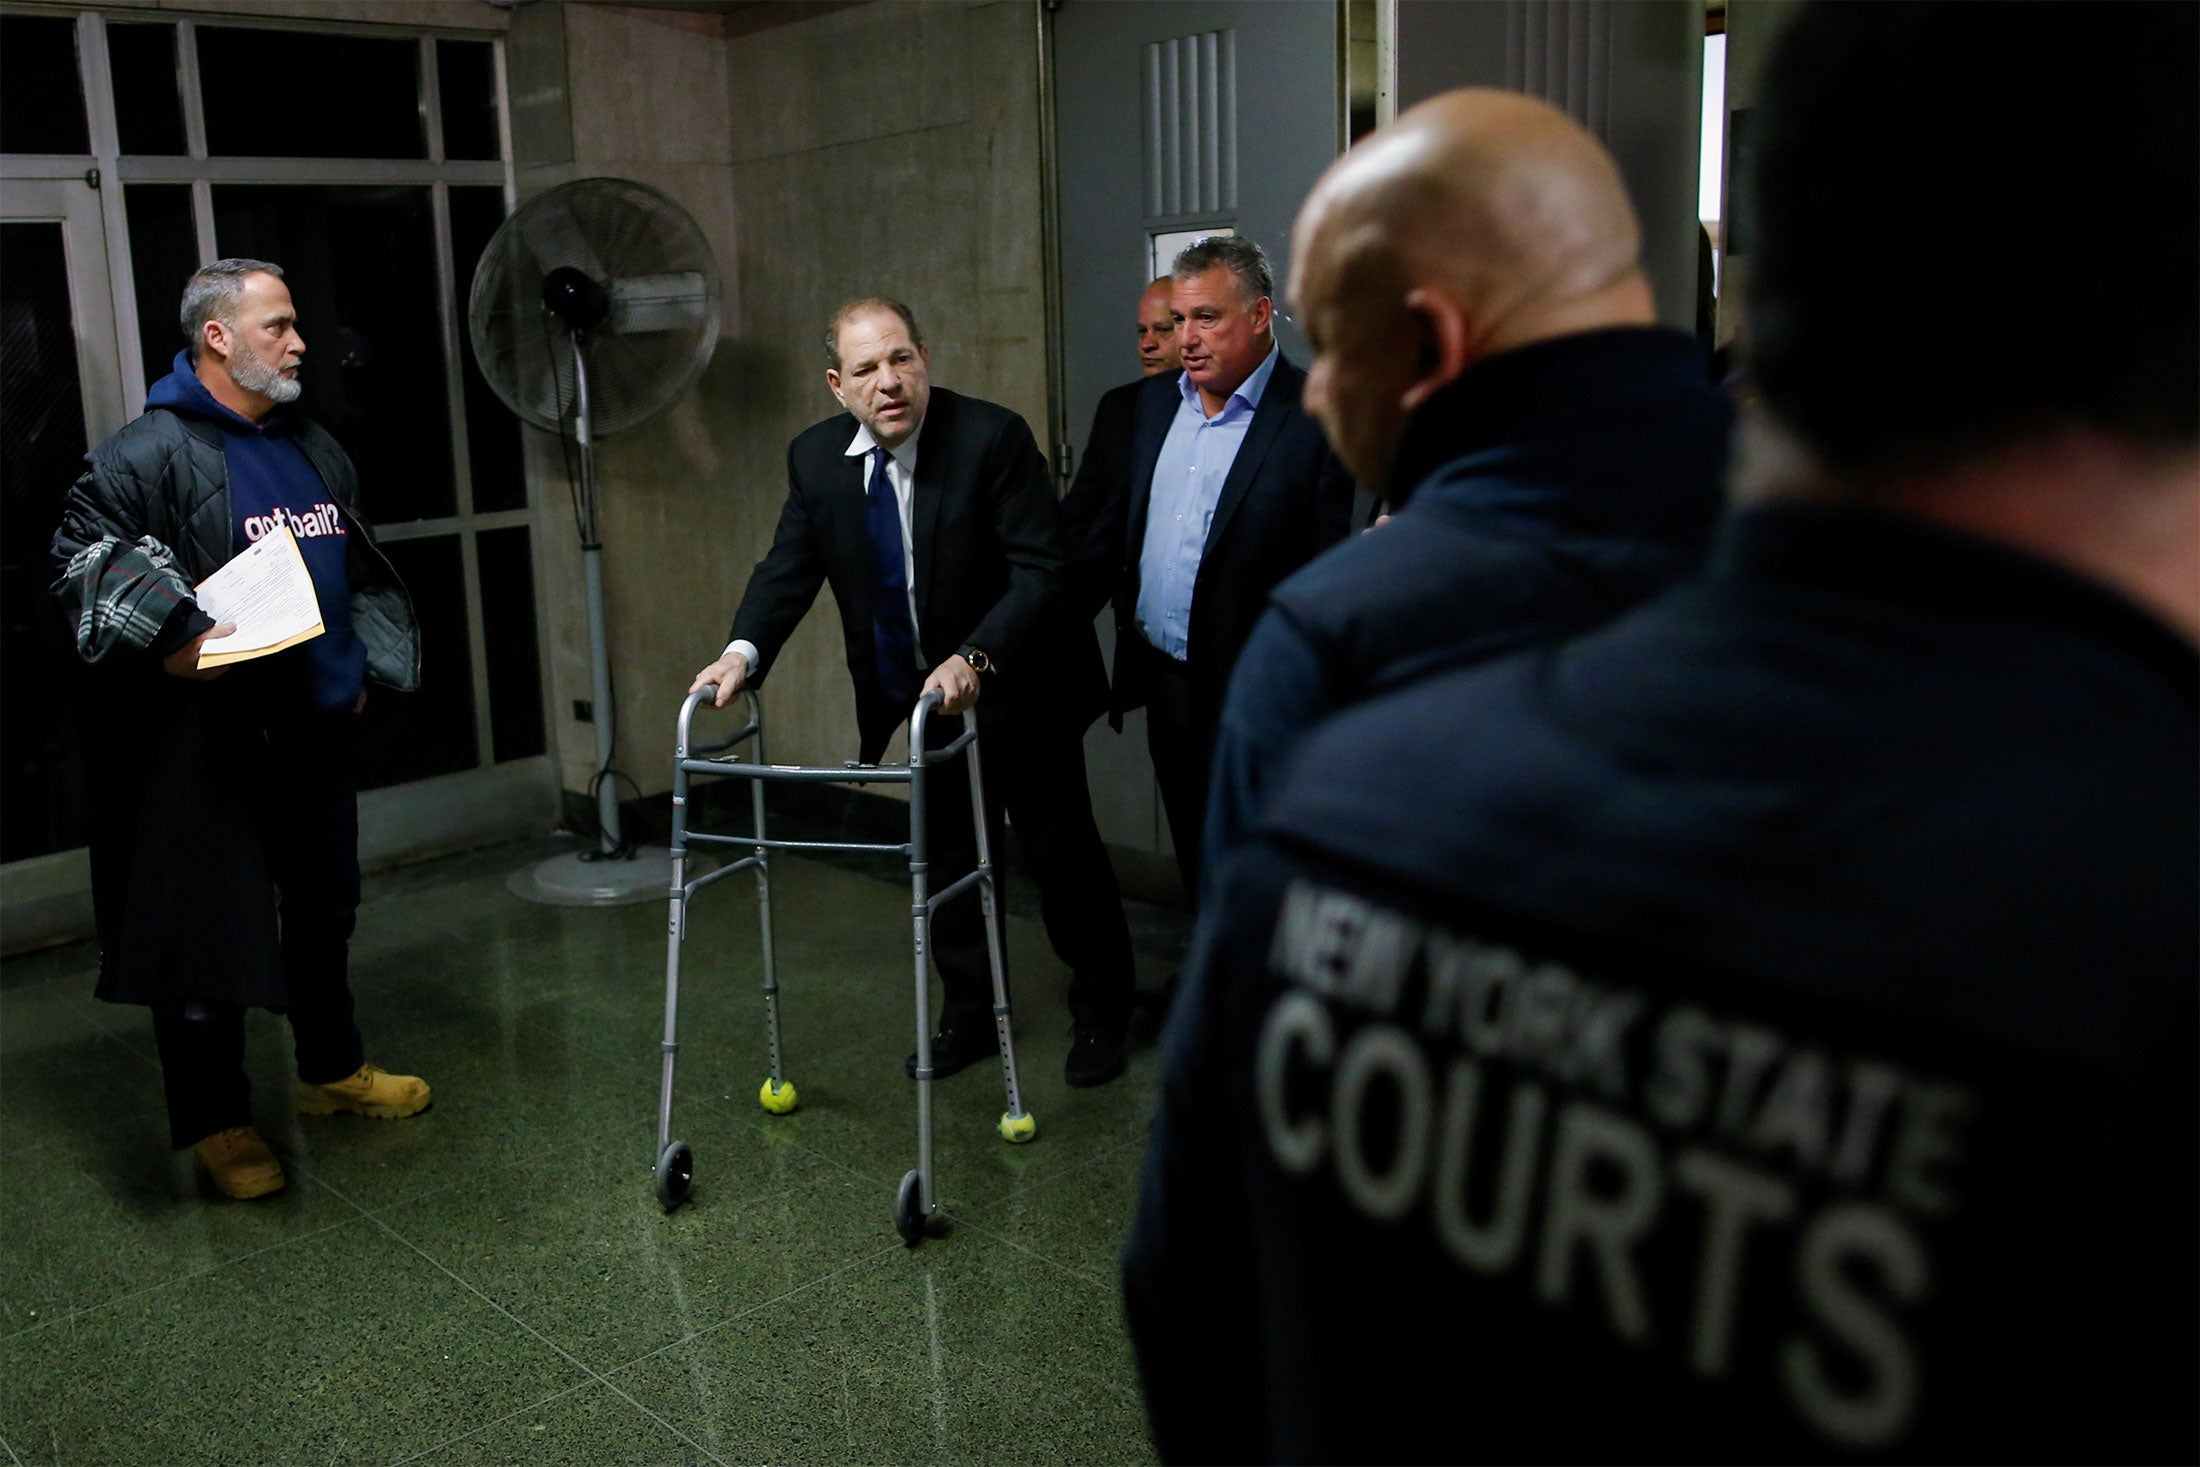 Weinstein, aided by a walker, exits a courtroom at the New York Supreme Court.